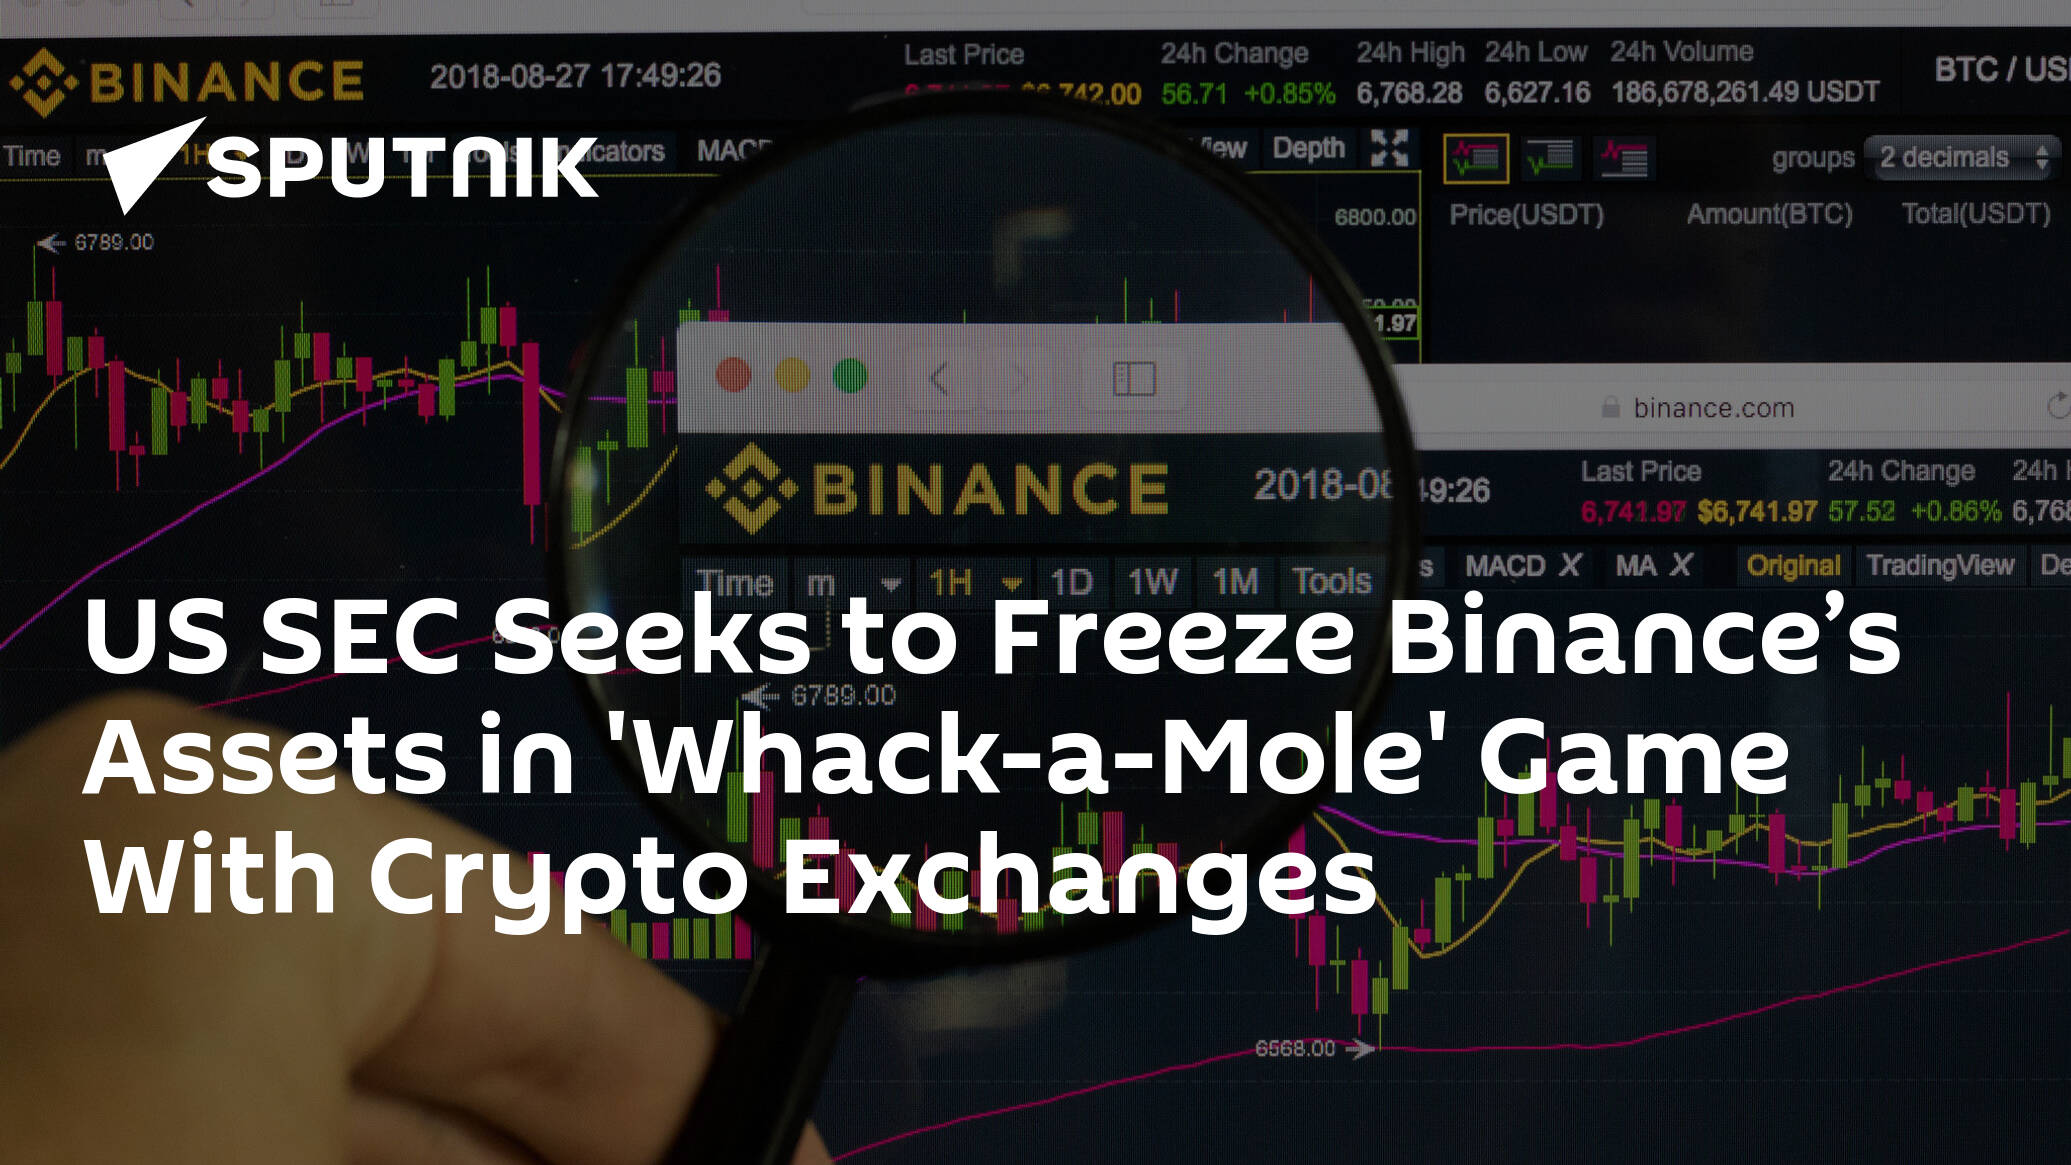 US SEC Seeks to Freeze Binance’s Assets in 'Whack-a-Mole' Game With Crypto Exchanges